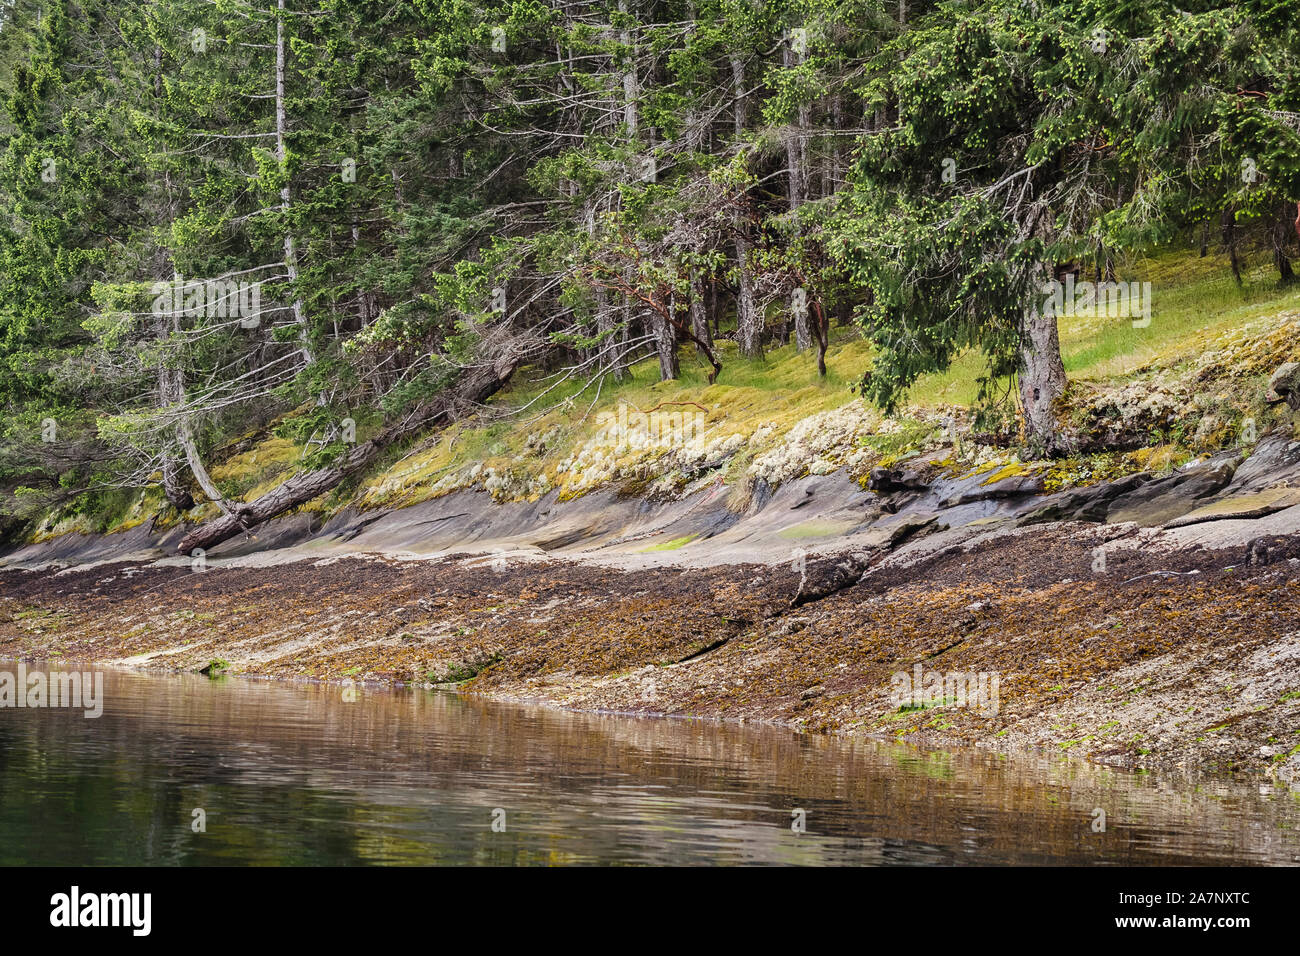 Subdued, earthy colours along a shoreline at low tide, with seaweed, sandstone, mosses, lichens and coniferous trees (Gulf Islands, British Columbia). Stock Photo